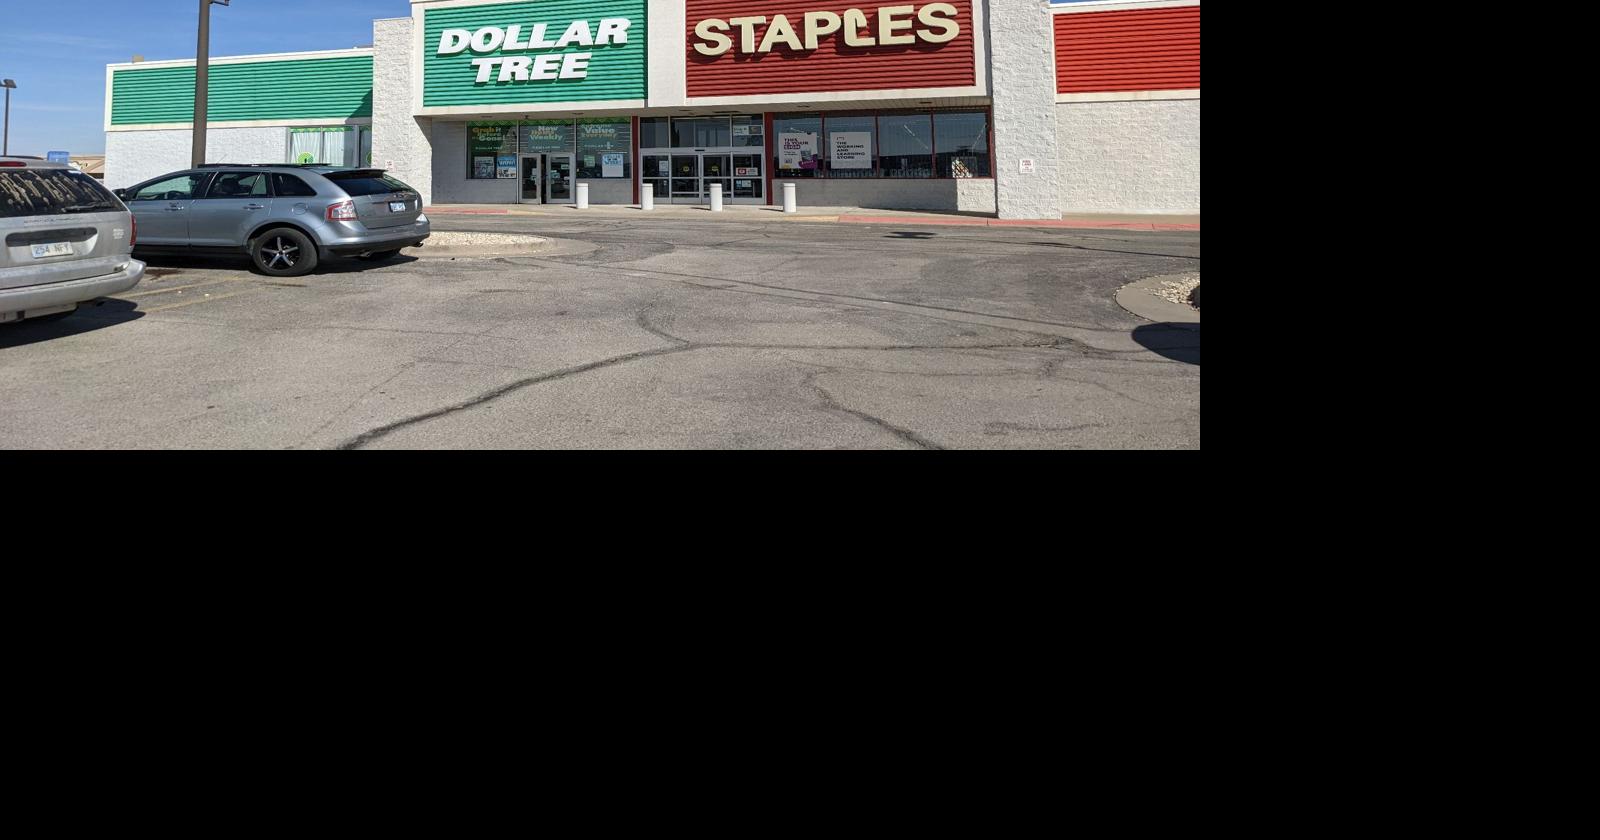 Staples, Williamsburg, VA  That Mall is sick and that Store is dead!